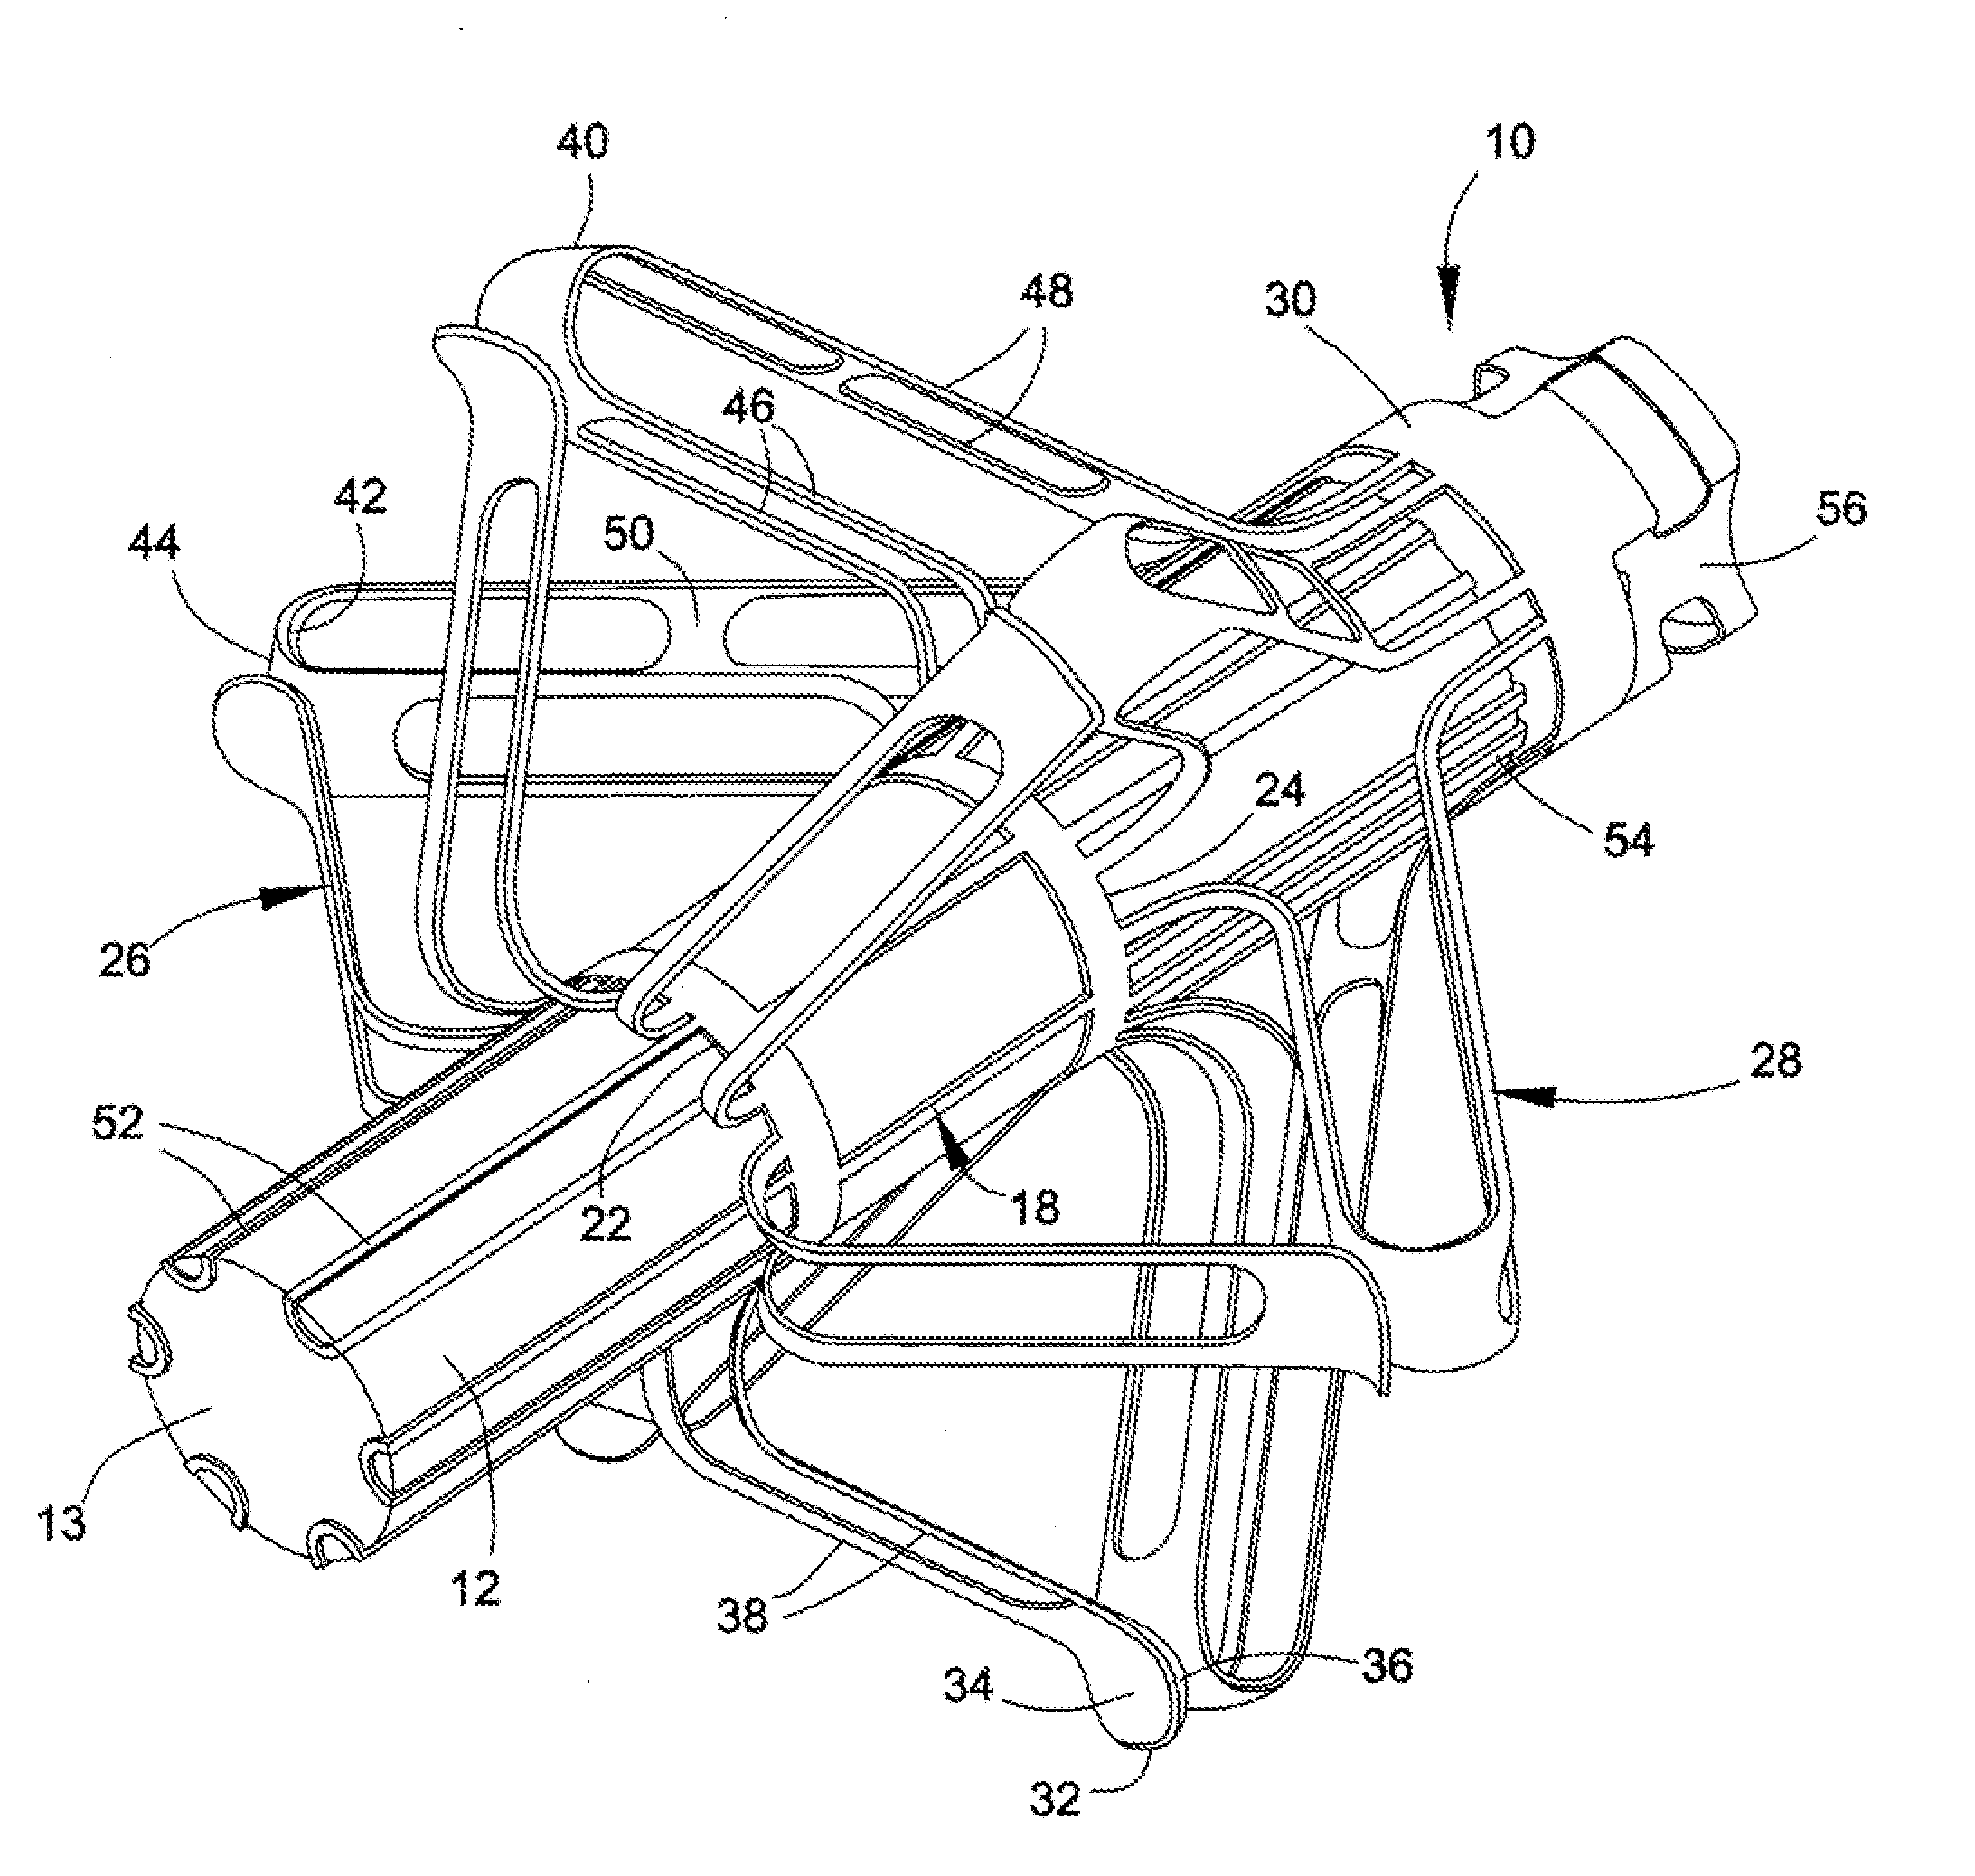 Delivery system, method, and anchor for medical implant placement